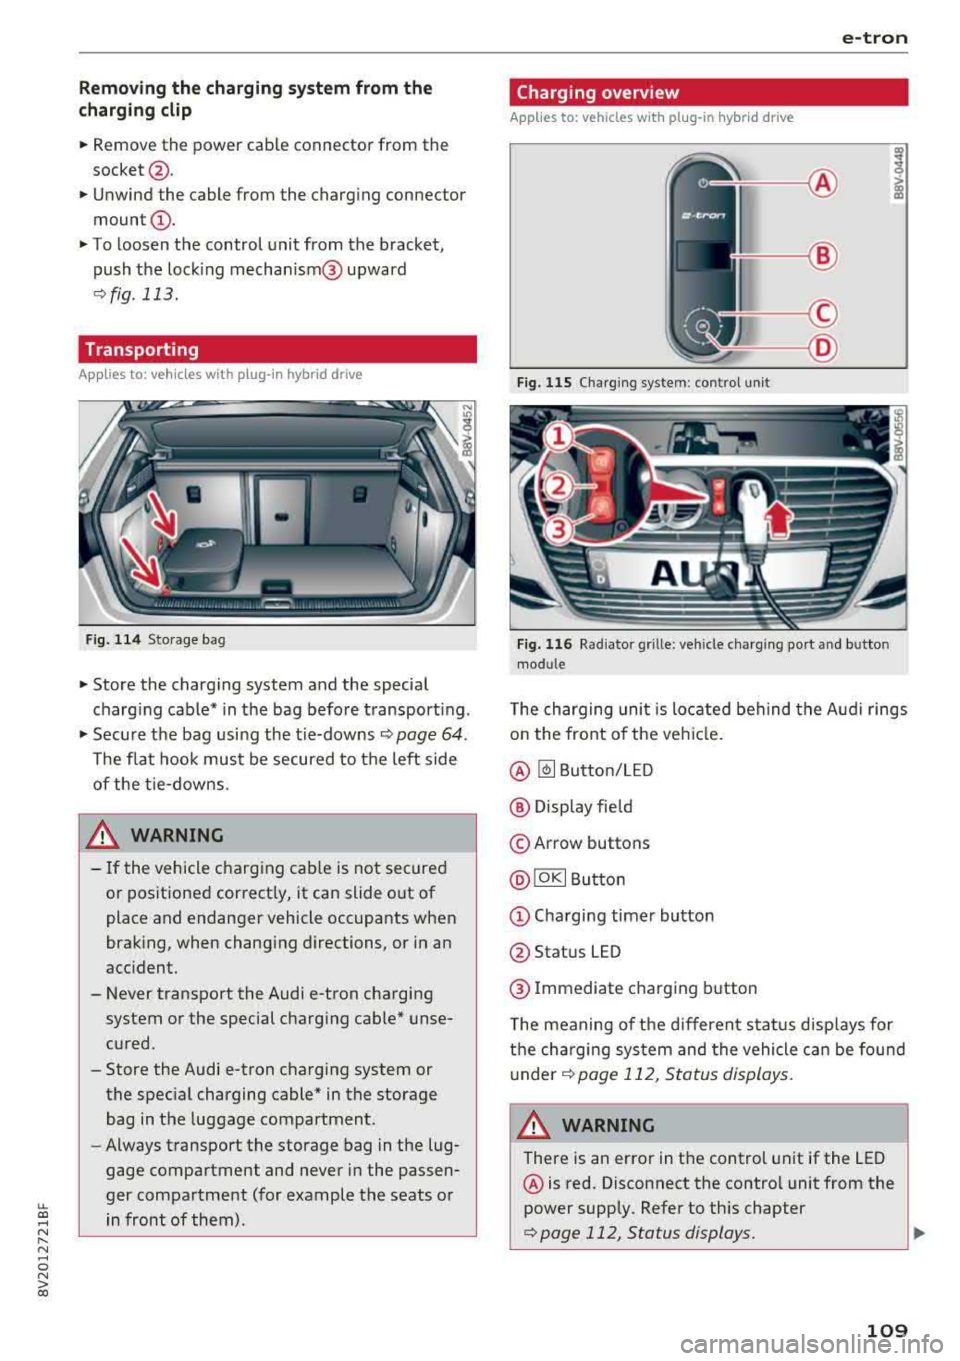 AUDI A3 SEDAN 2018  Owners Manual LL co ..... N 
" N ..... 0 N > co 
Removing  the  charging  system from  the 
charging  clip 
.,. Remove  the  power  cable  connector  from  the 
socket @ . 
.,. Unwind  the cable  from  the  chargin